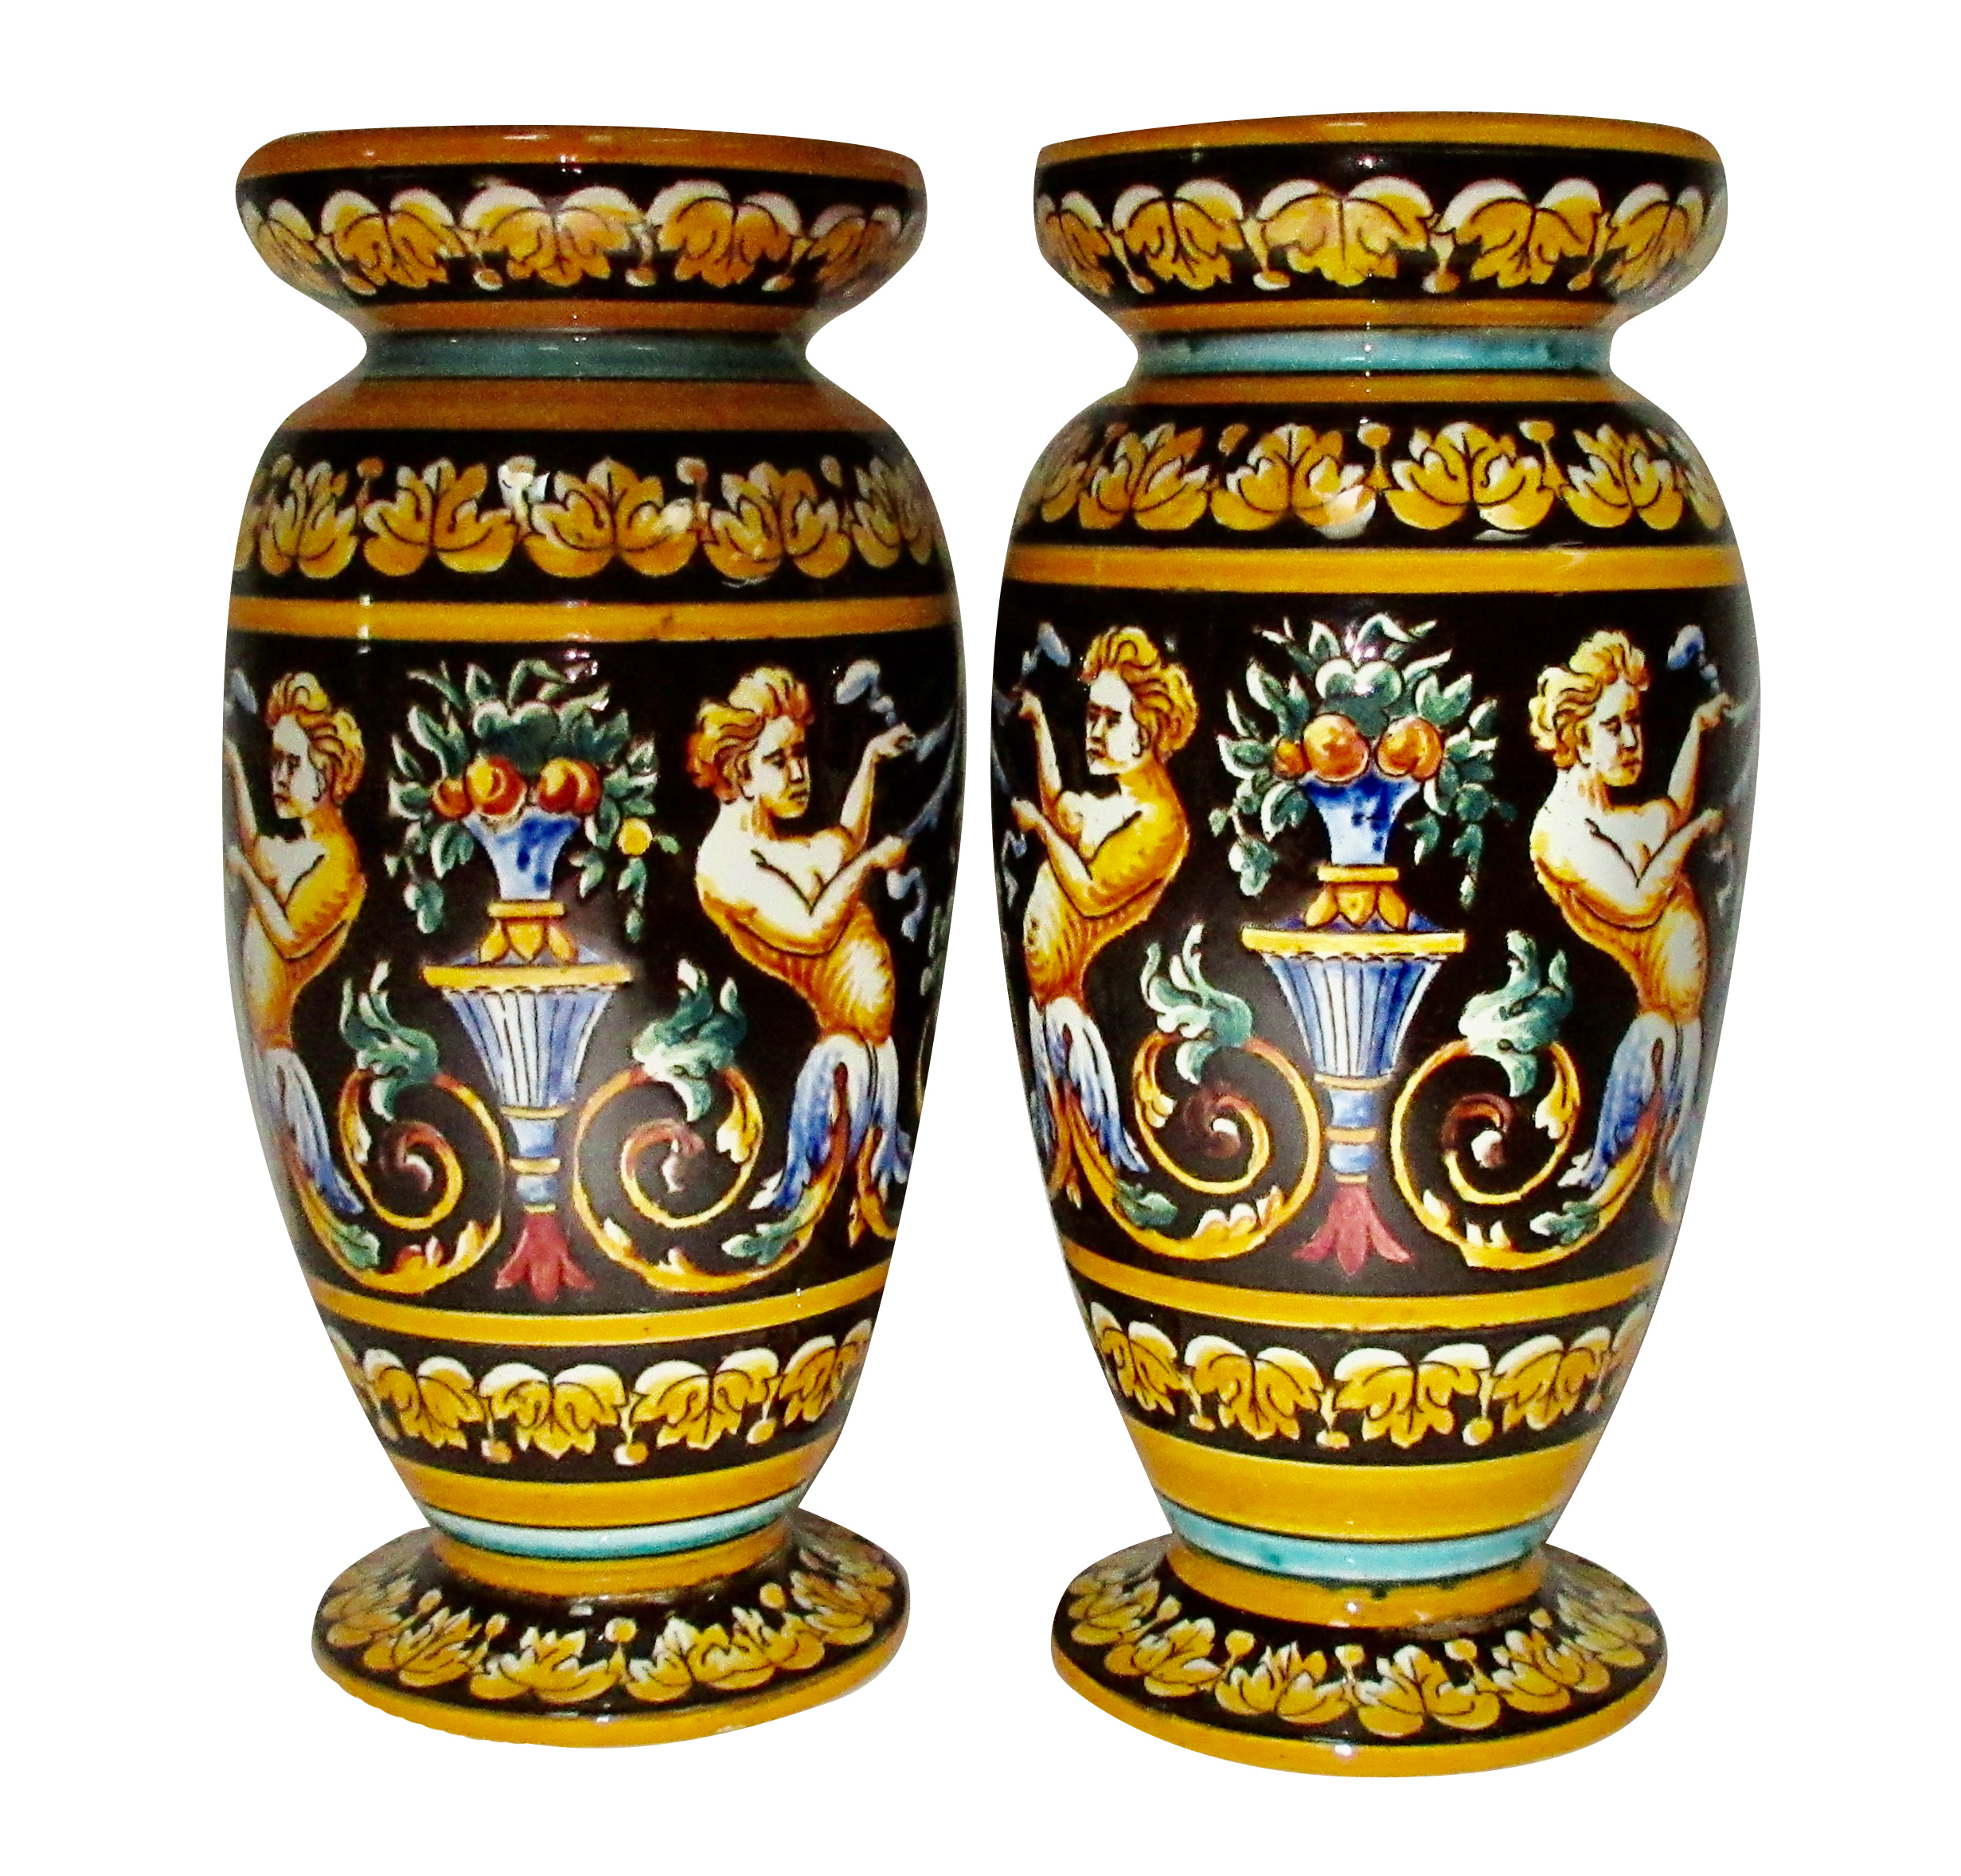 Antique Gien French Faience Vases, Pair